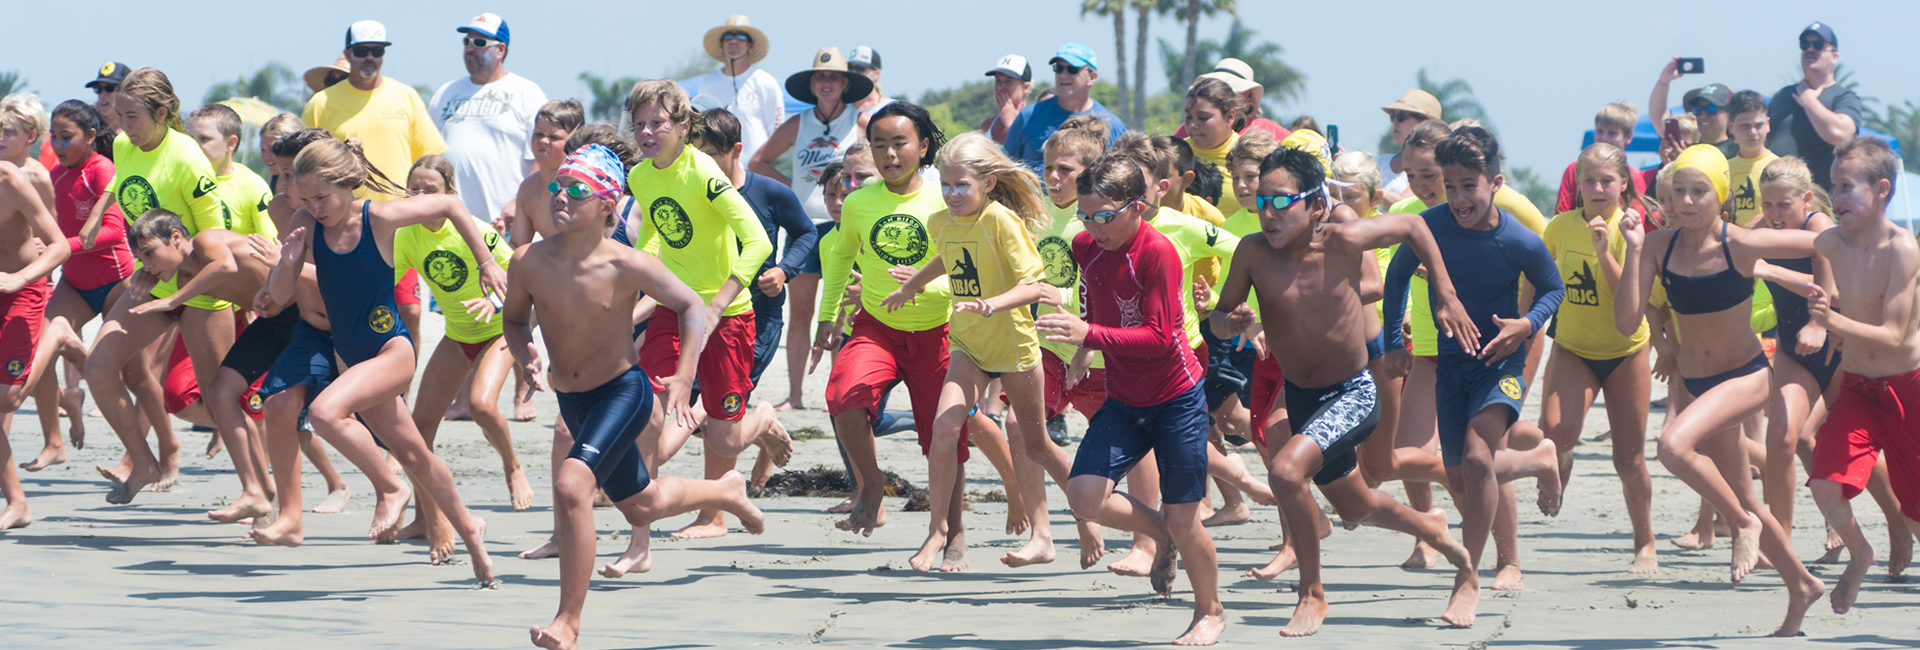 Young boys and girls competing in a jr. lifeguard competition